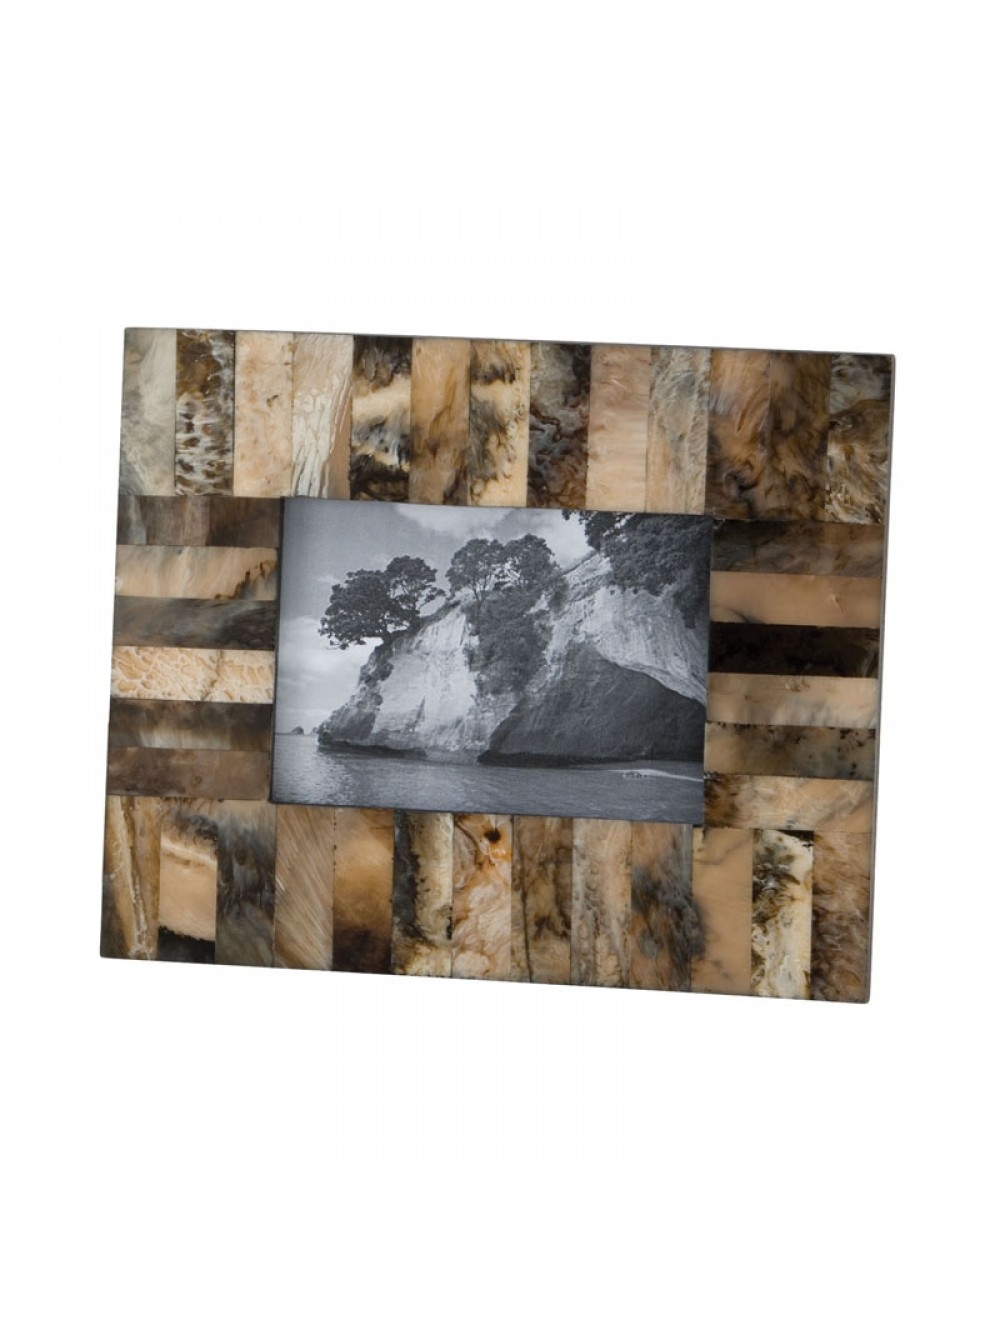 CHASTAIN PICTURE FRAME - Image 0